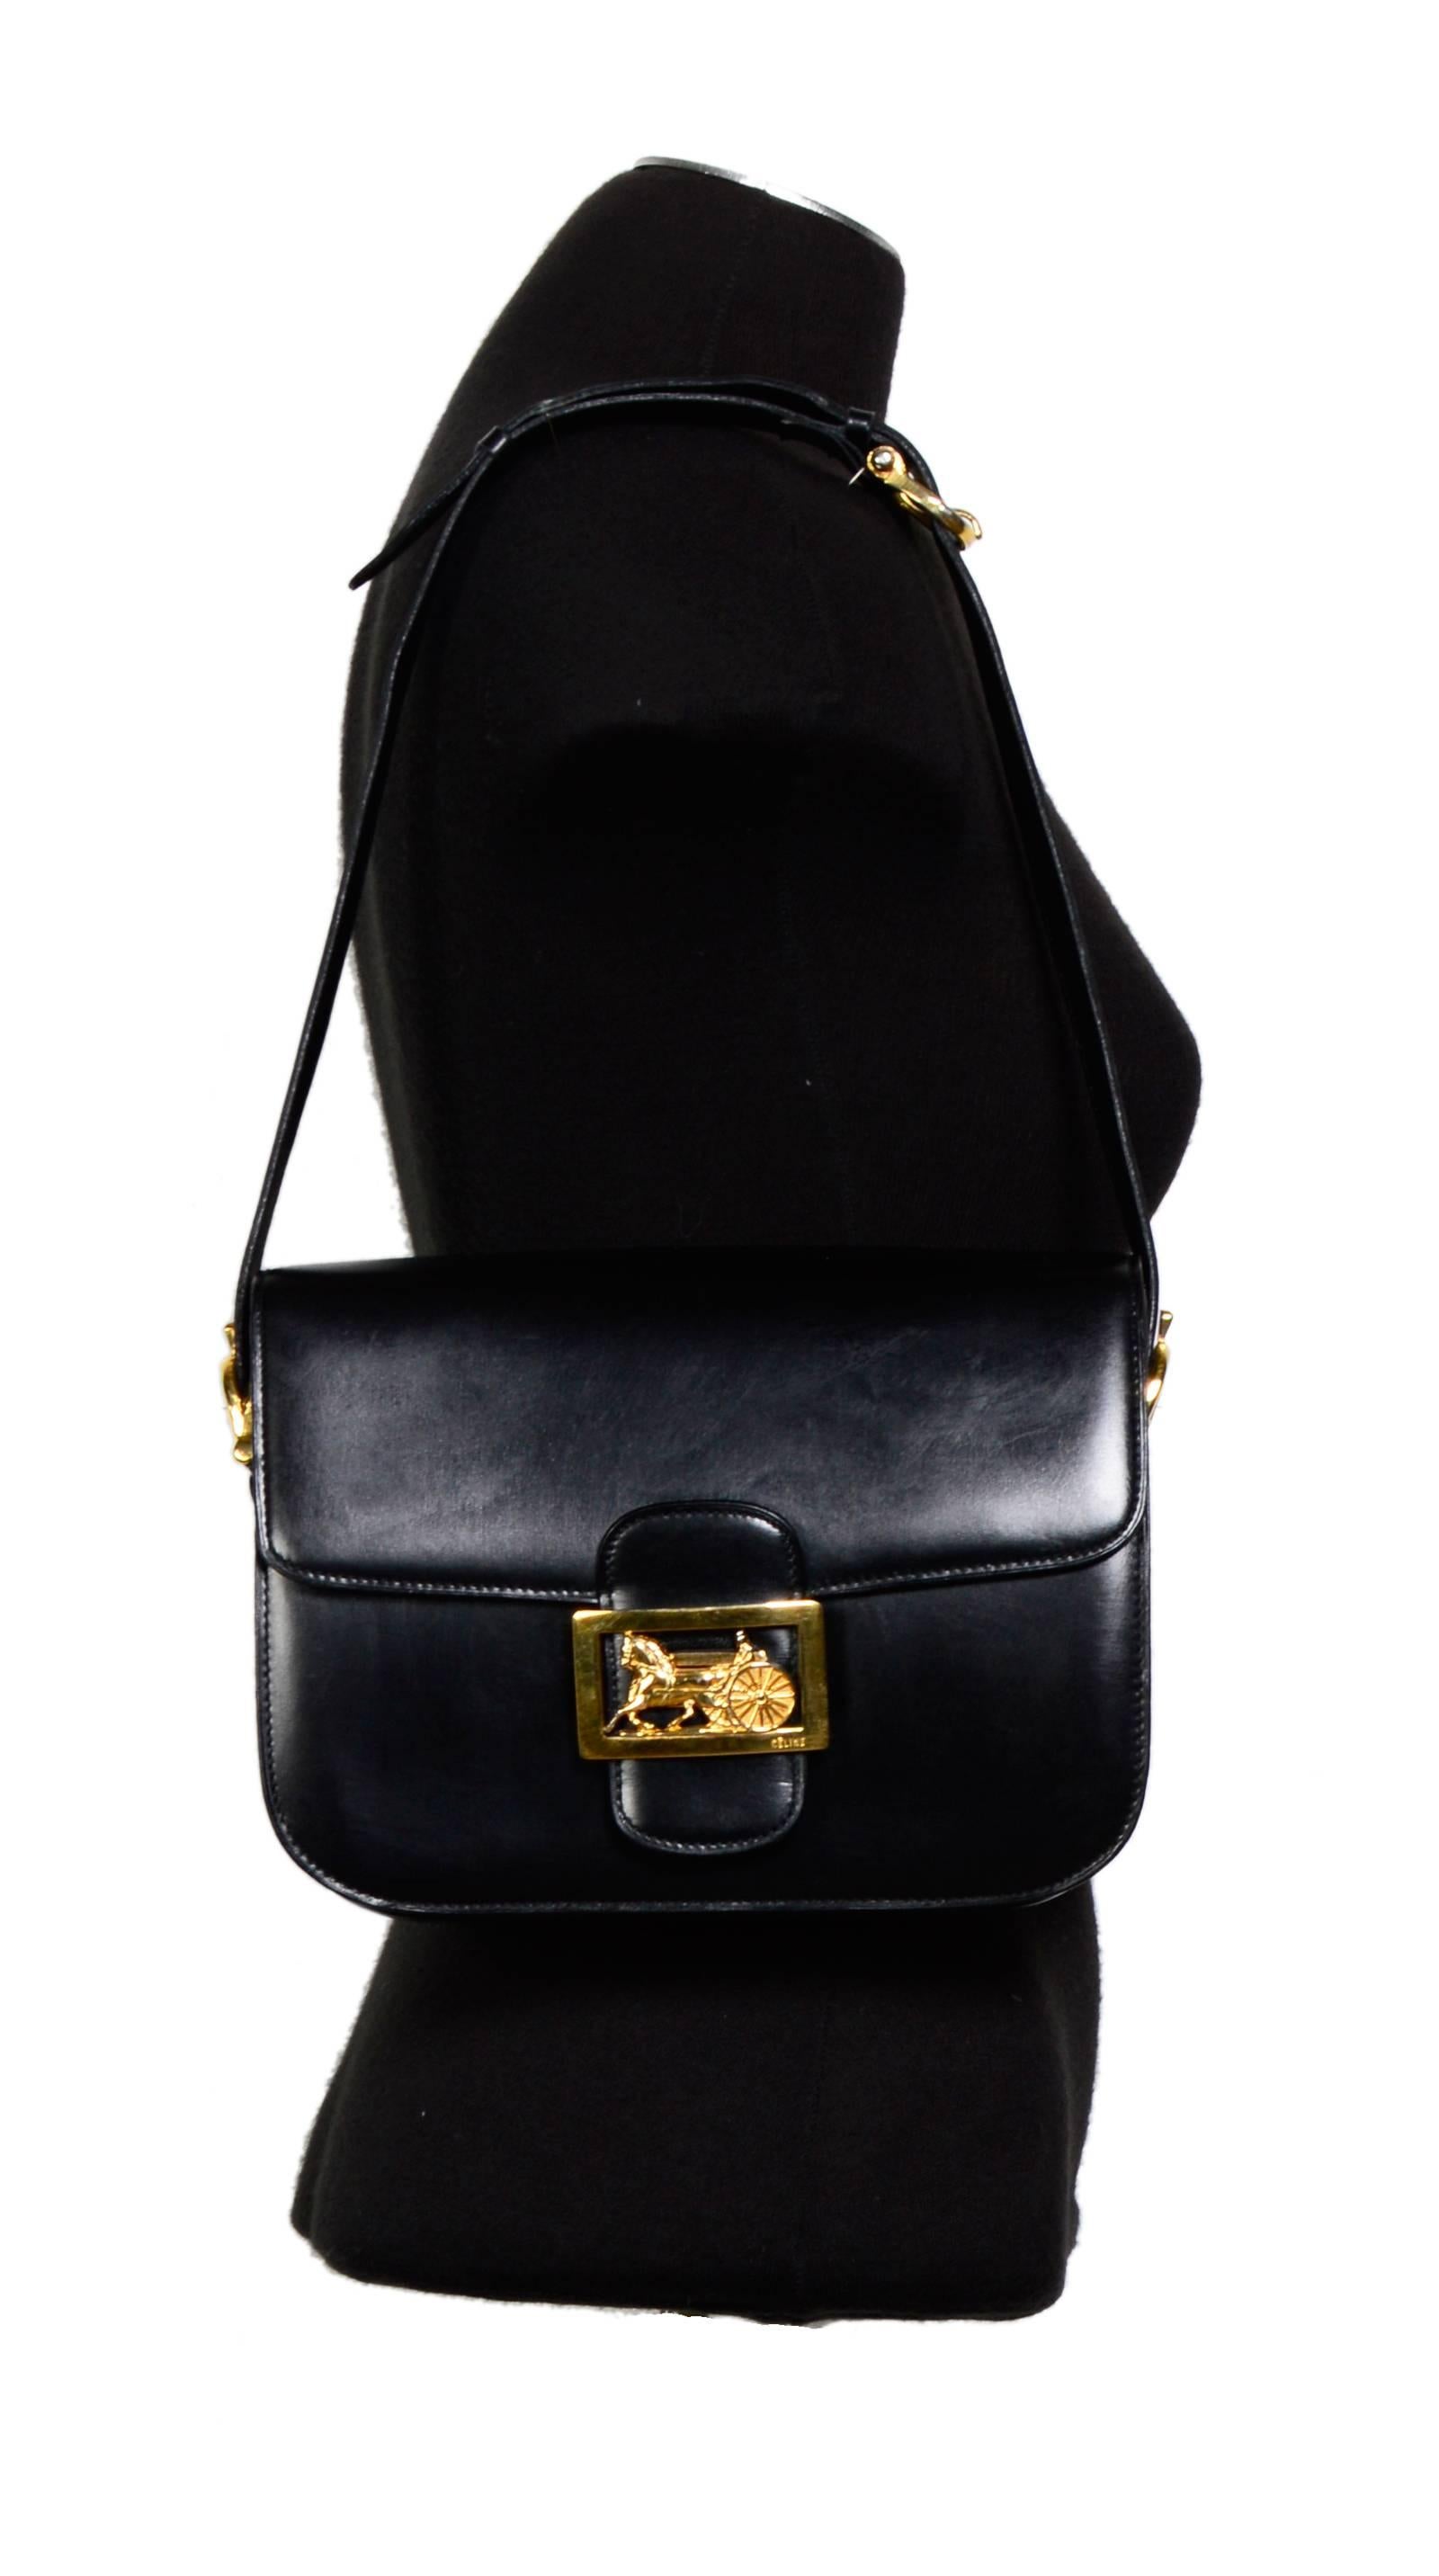 Sublime condition! Hardly ever used! 
Celine 1970's  Horse Carriage Buckle Black Box Leather Shoulder Bag

Three compartments. Three pockets + one zippered pocket.  Adjustable shoulder strap.  

Marked CELINE Paris Made in Italy. 

CONDITION